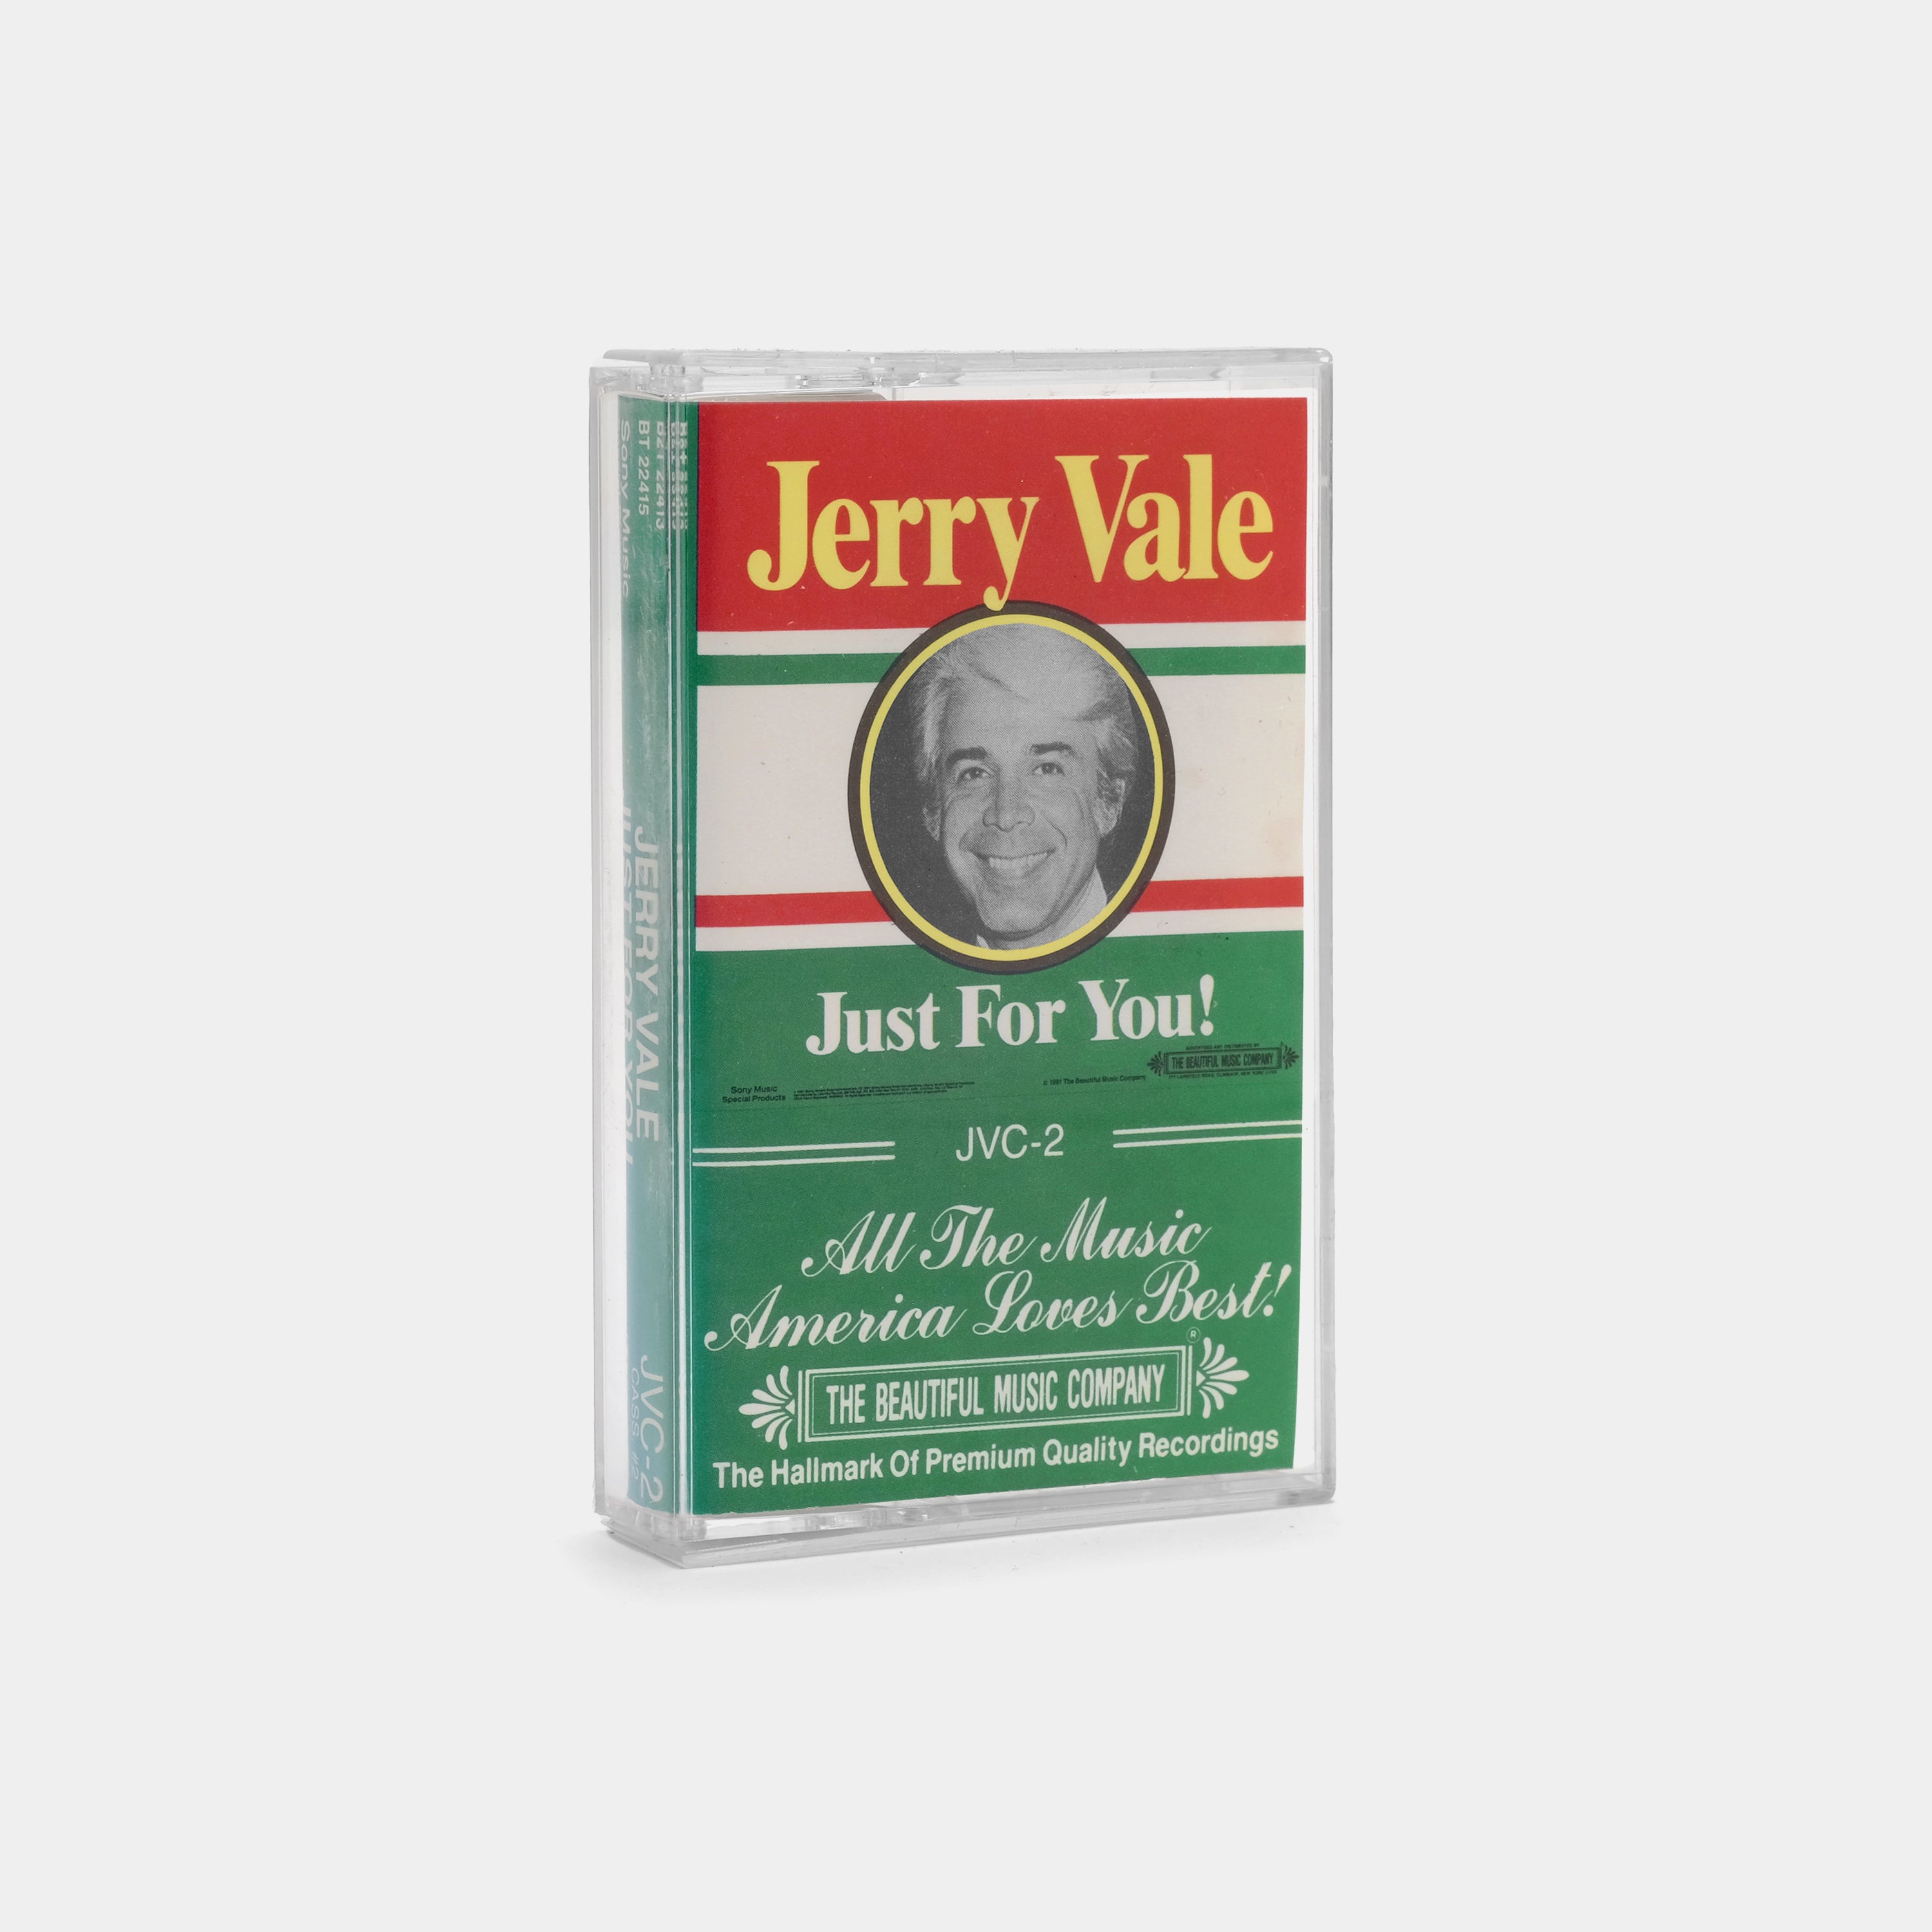 Jerry Vale - Just For You! Cassette Tape